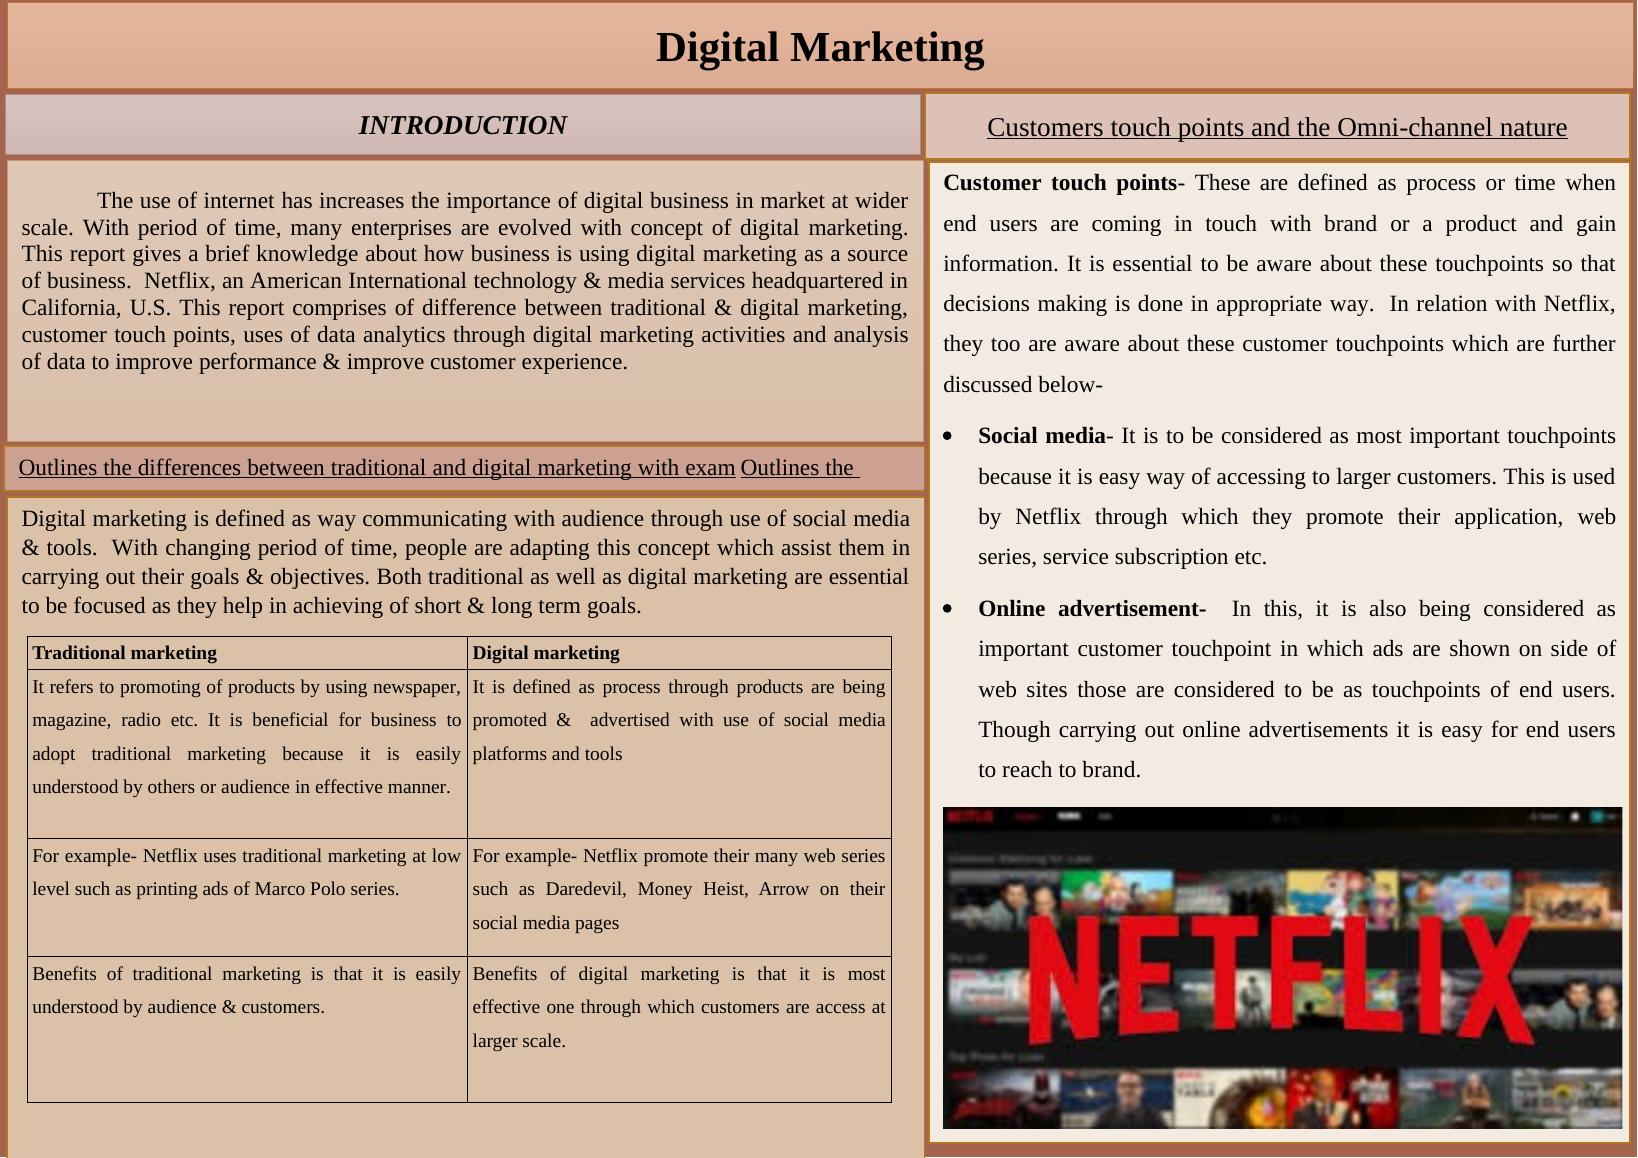 Digital Marketing: Traditional vs. Digital Marketing and Customer Touchpoints_1